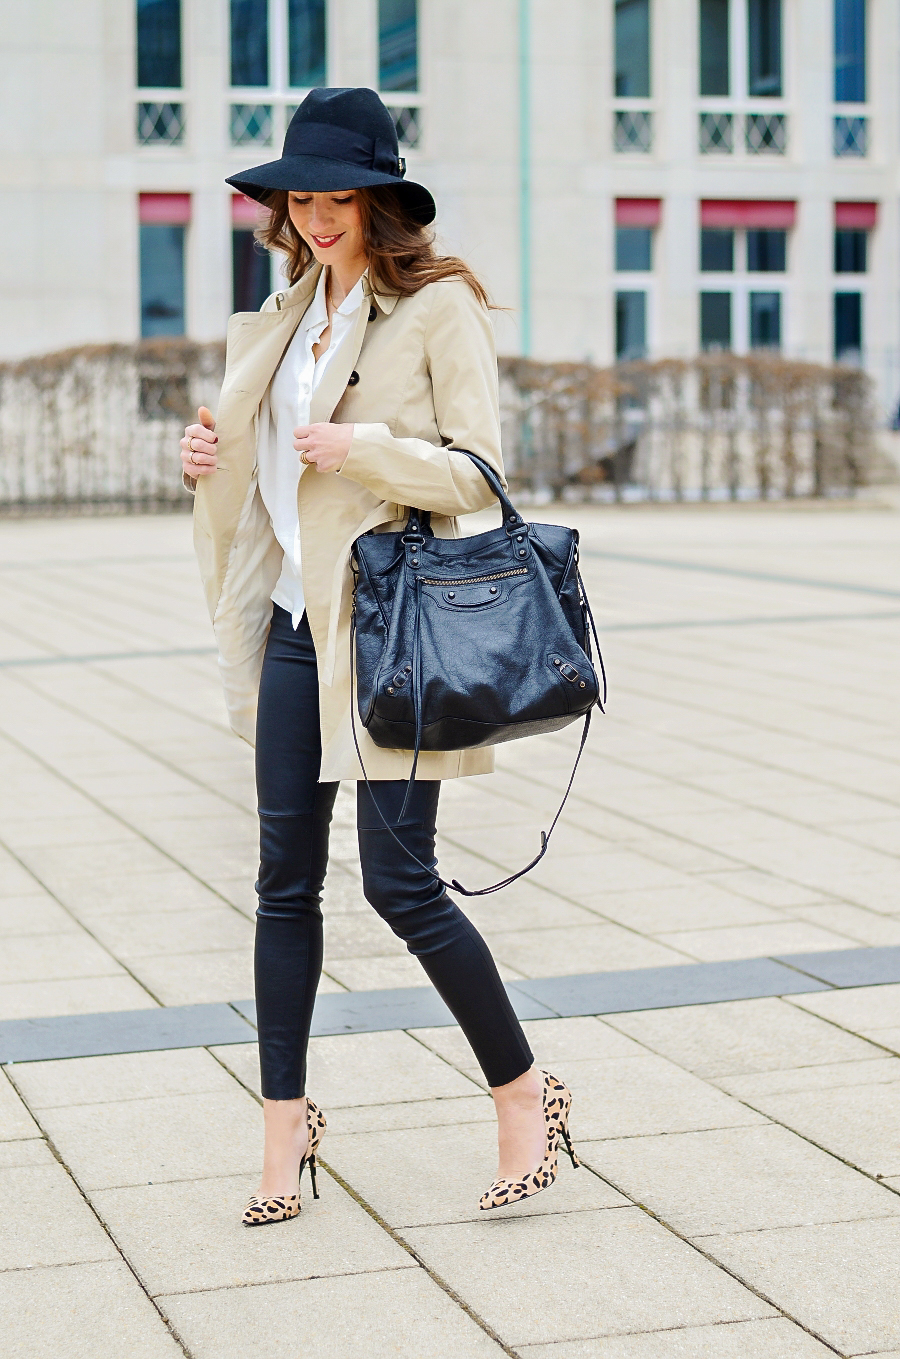 trenchcoat outfit style fashionblog